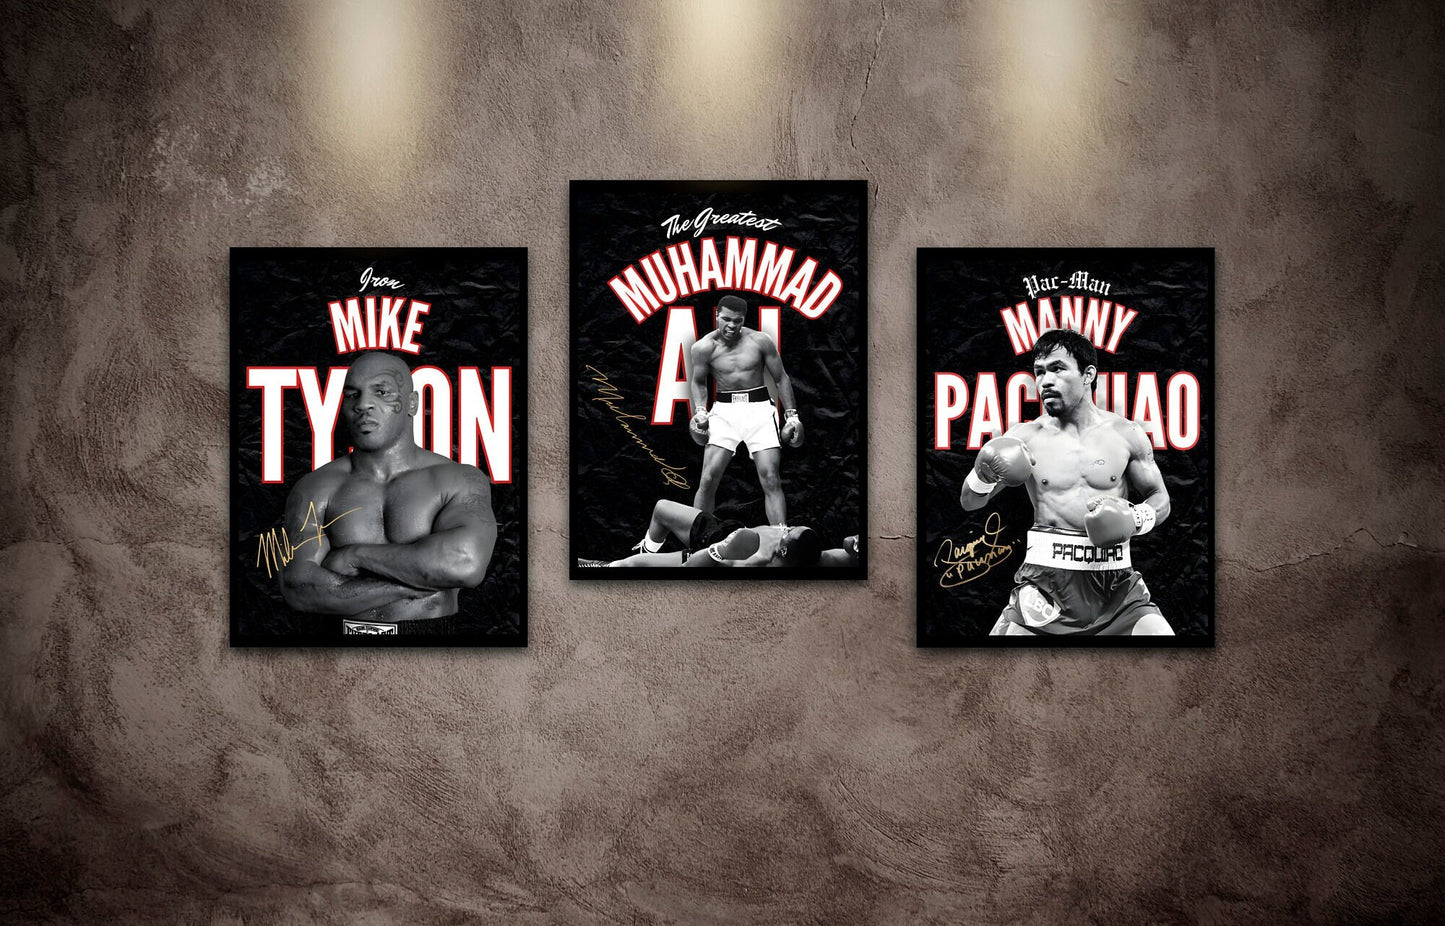 Poster Manny Pacquiao